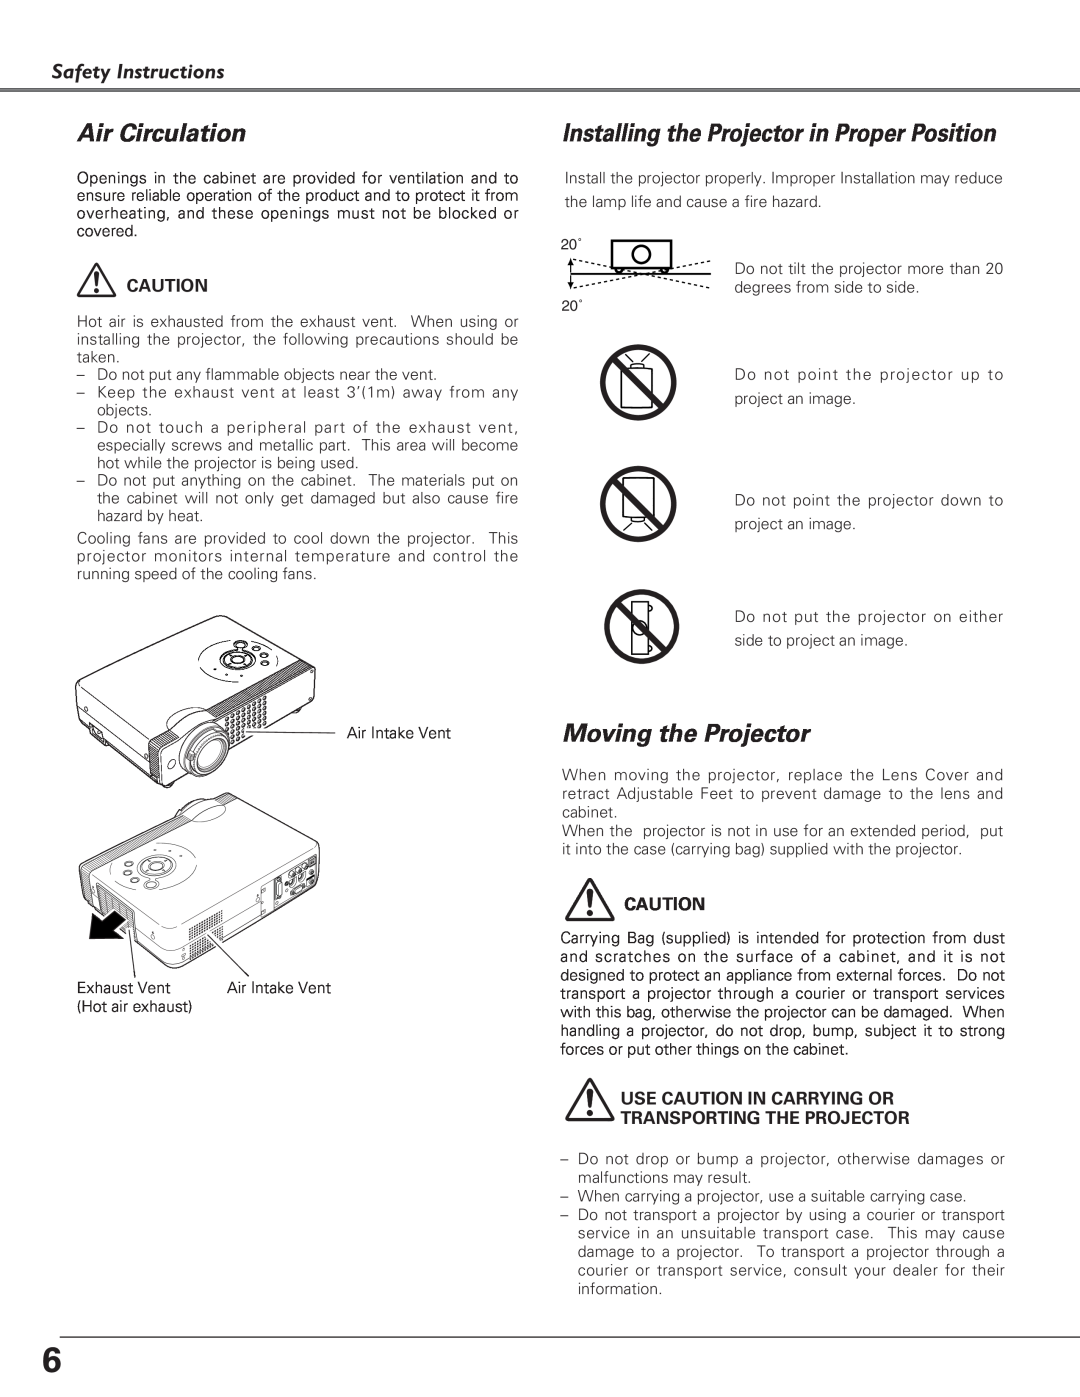 Sanyo PLC-XU58 Air Circulation, Installing the Projector in Proper Position, Moving the Projector, Safety Instructions 